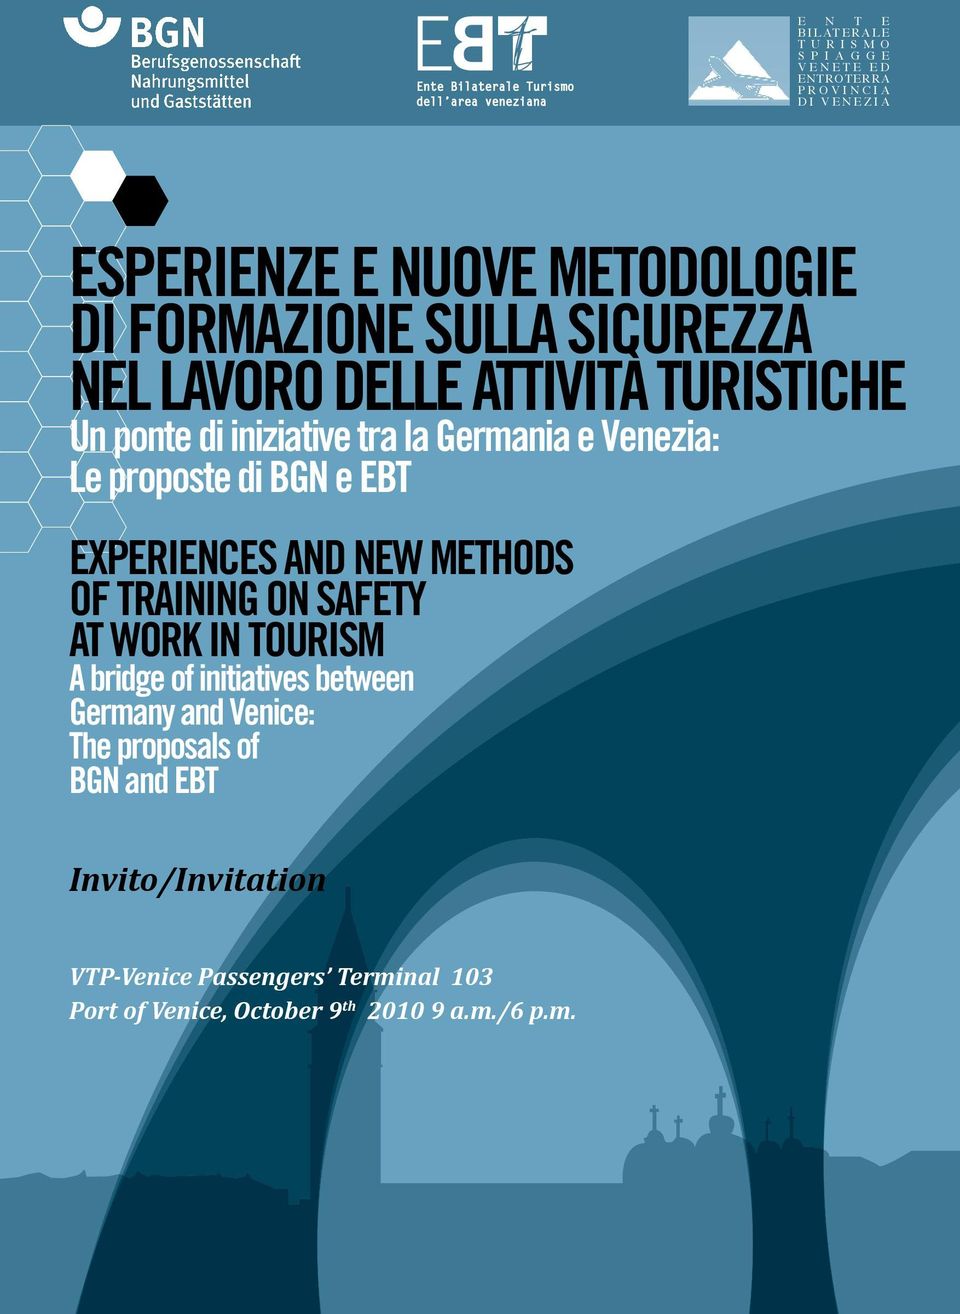 Venezia: Le proposte di BGN e EBT EXPERIENCES AND NEW METHODS OF TRAINING ON SAFETY AT WORK IN TOURISM A bridge of initiatives